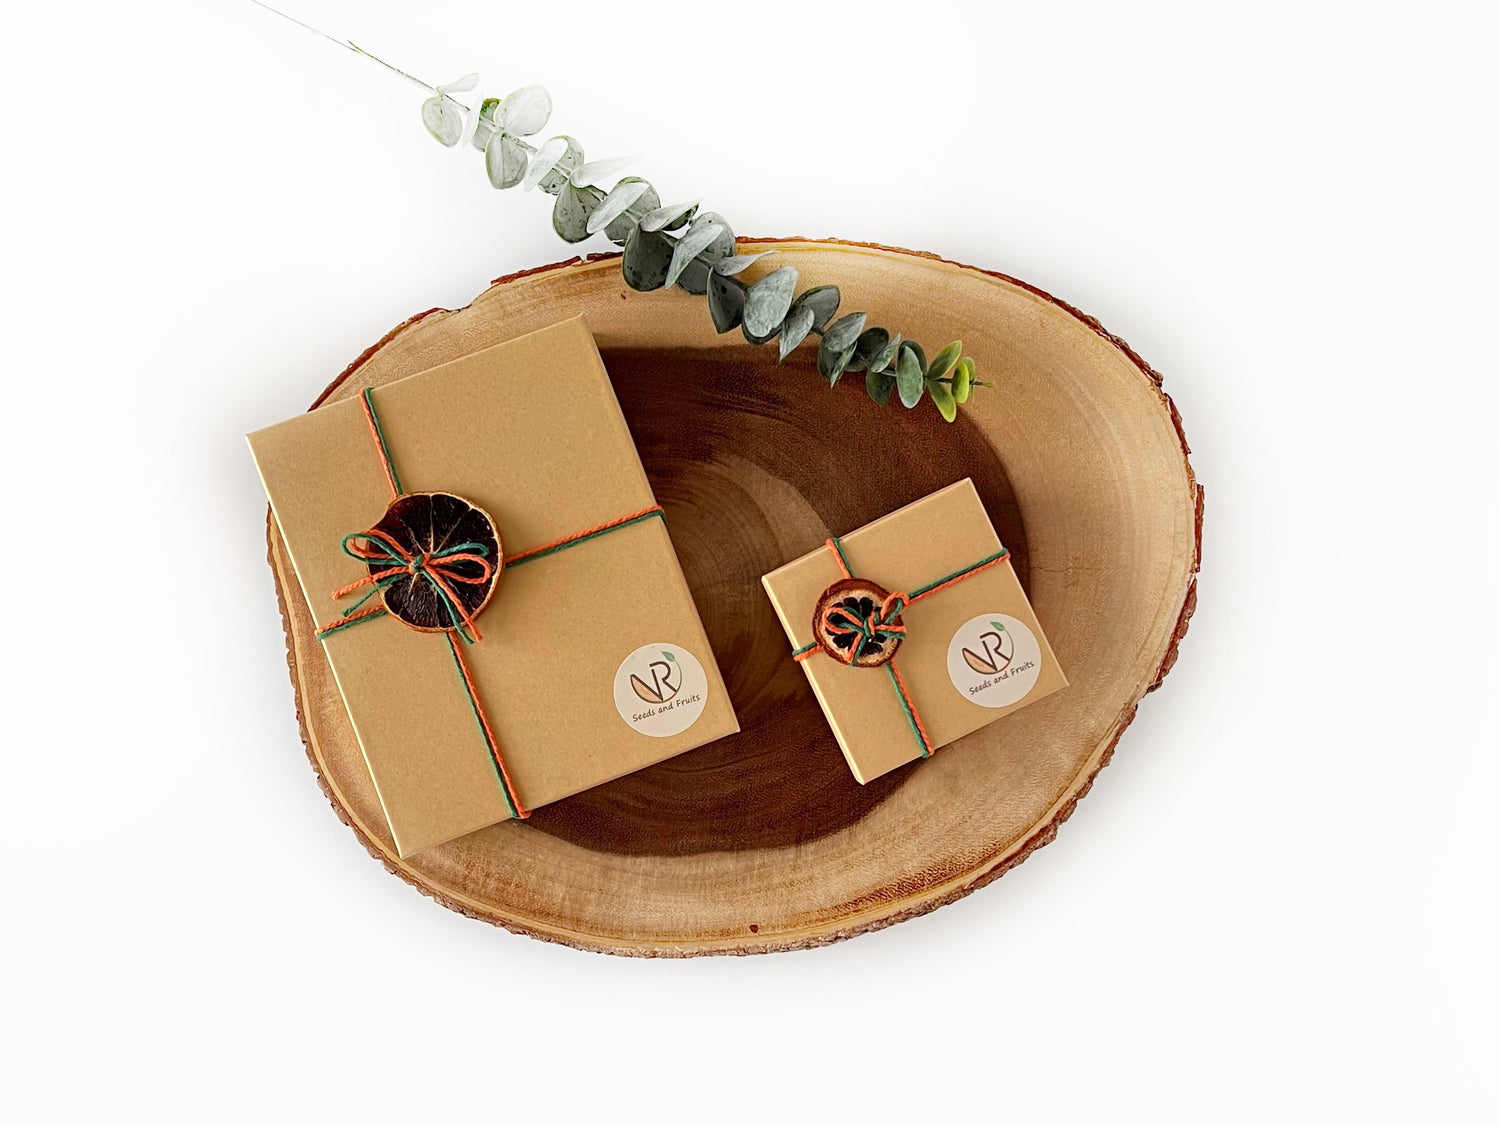 Your VR experience begins at the right moment you receive your product in a carefully and beautifully wrapped box with a scented and dehydrated fruit on top that gives an extra special touch to every order we deliver.